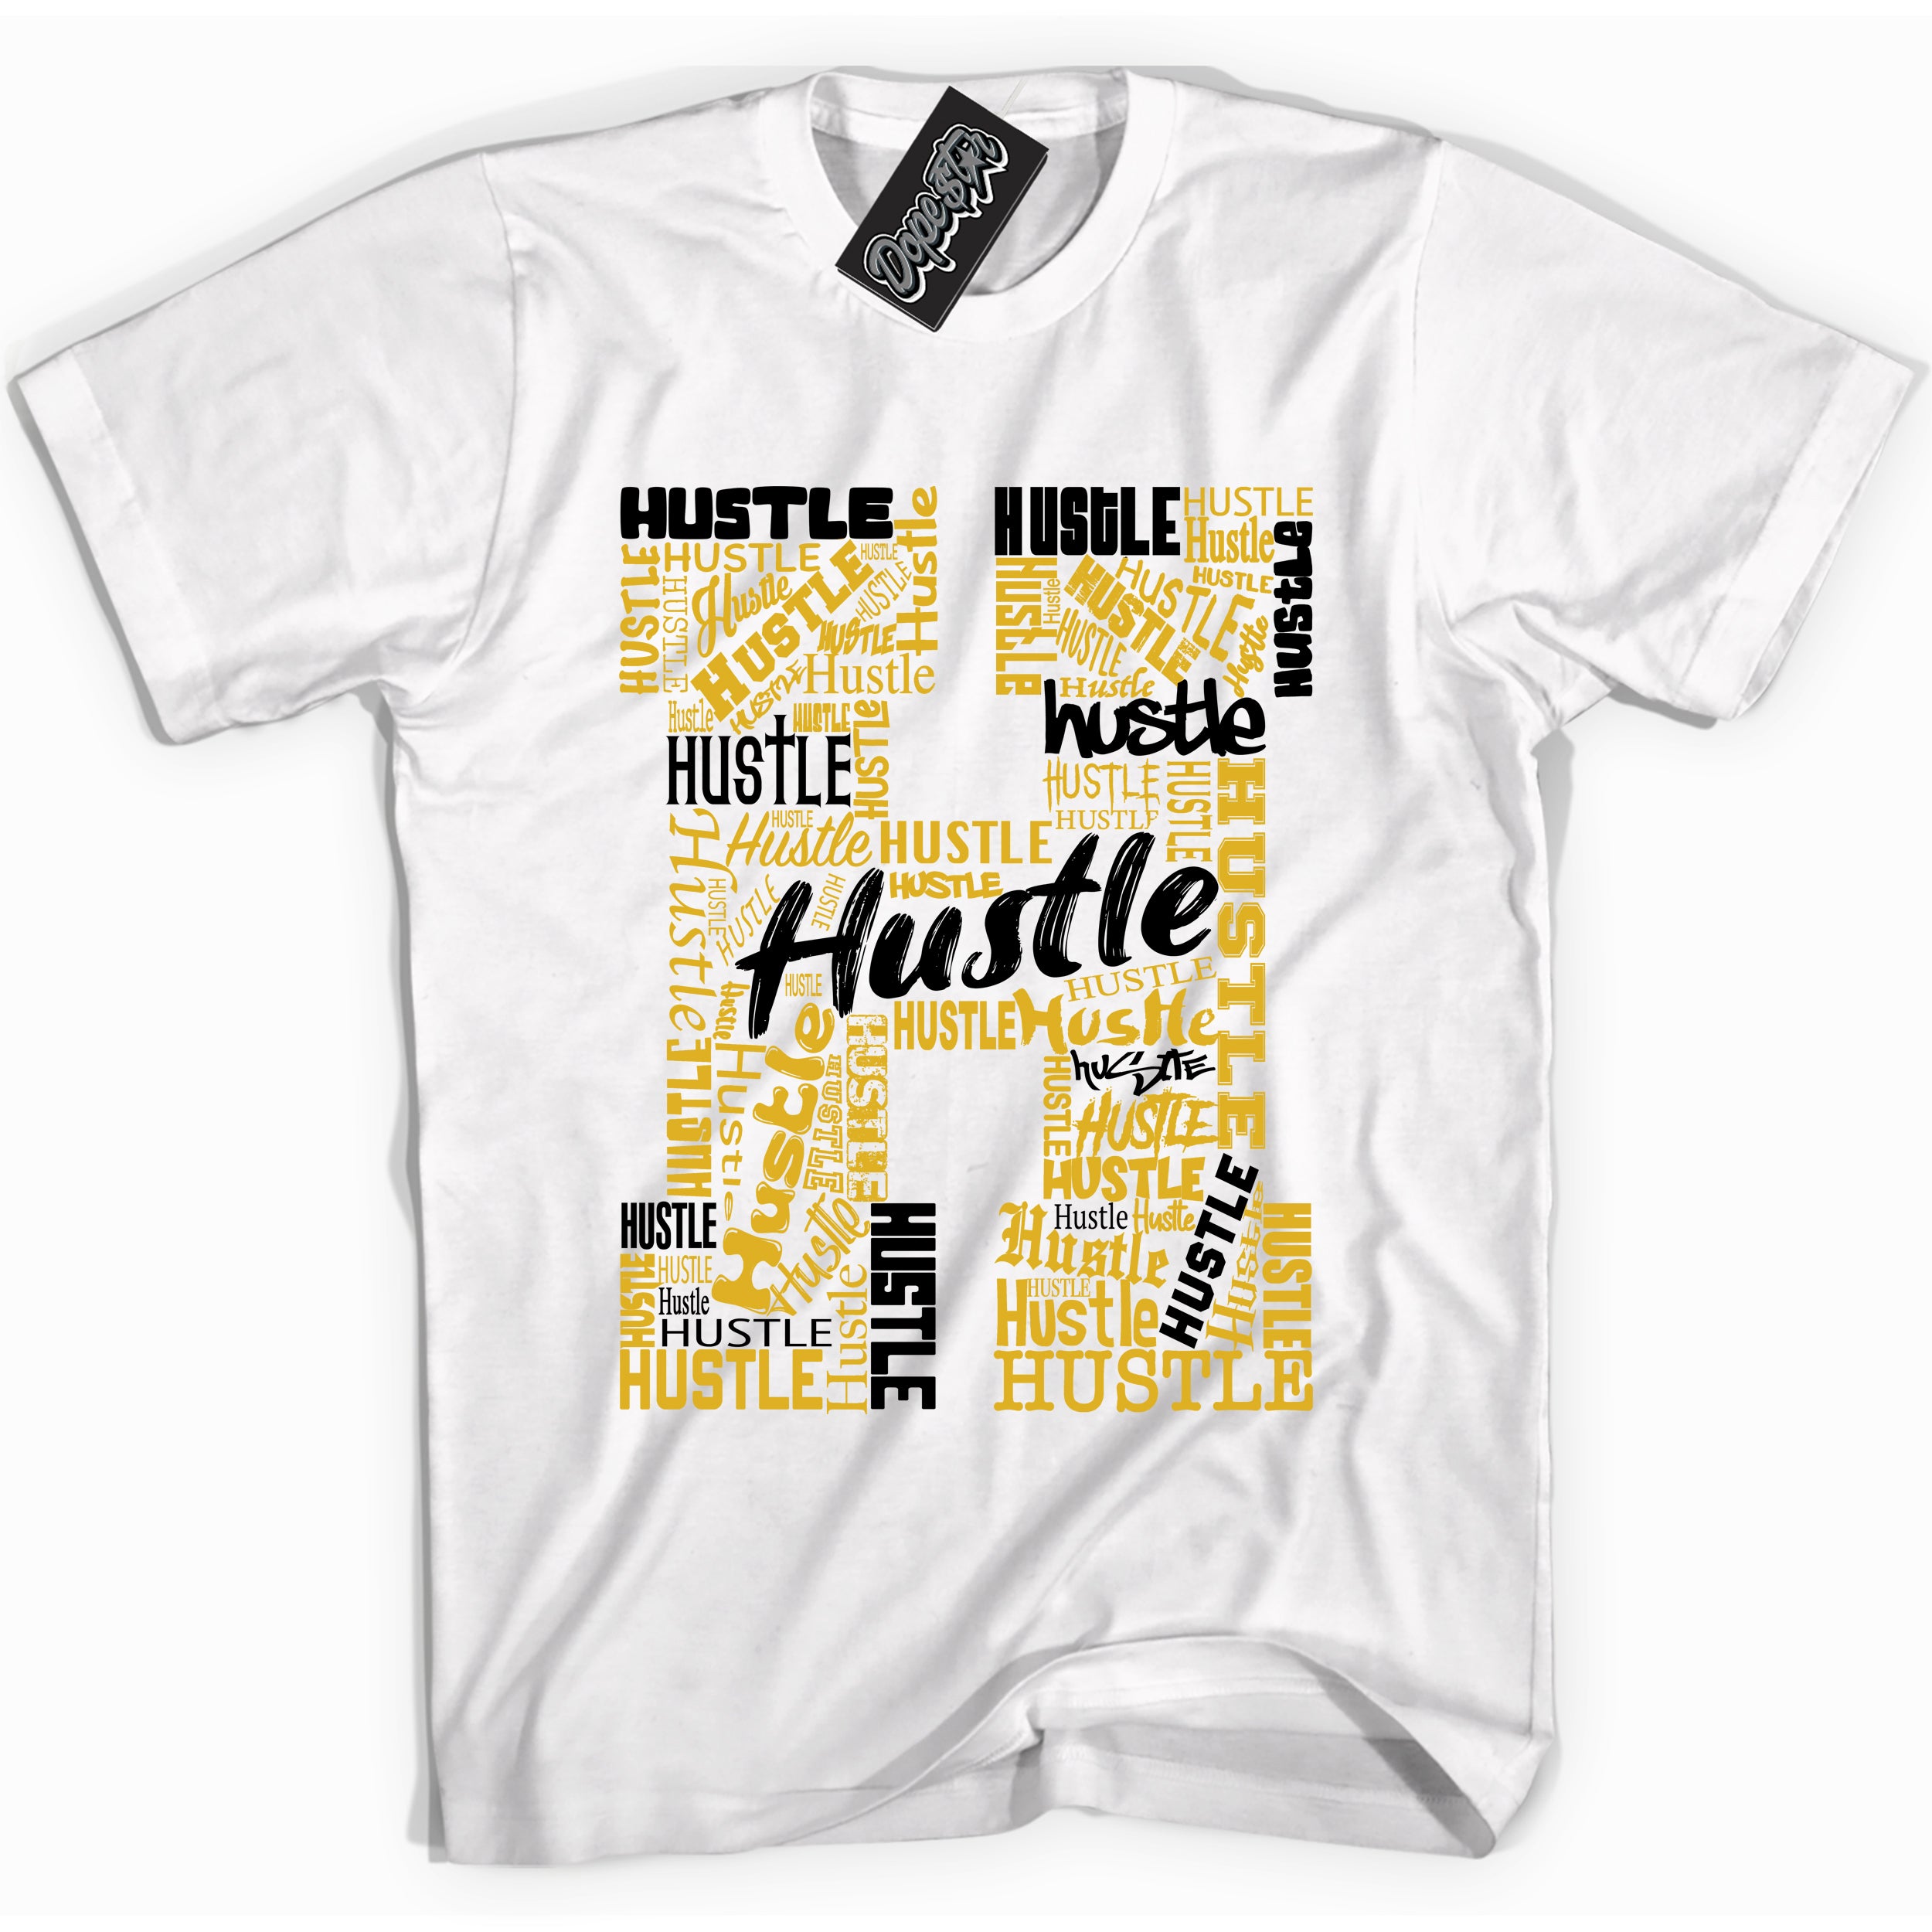 Cool White Shirt With Hustle H design That Perfectly Matches YELLOW OCHRE 6s Sneakers.